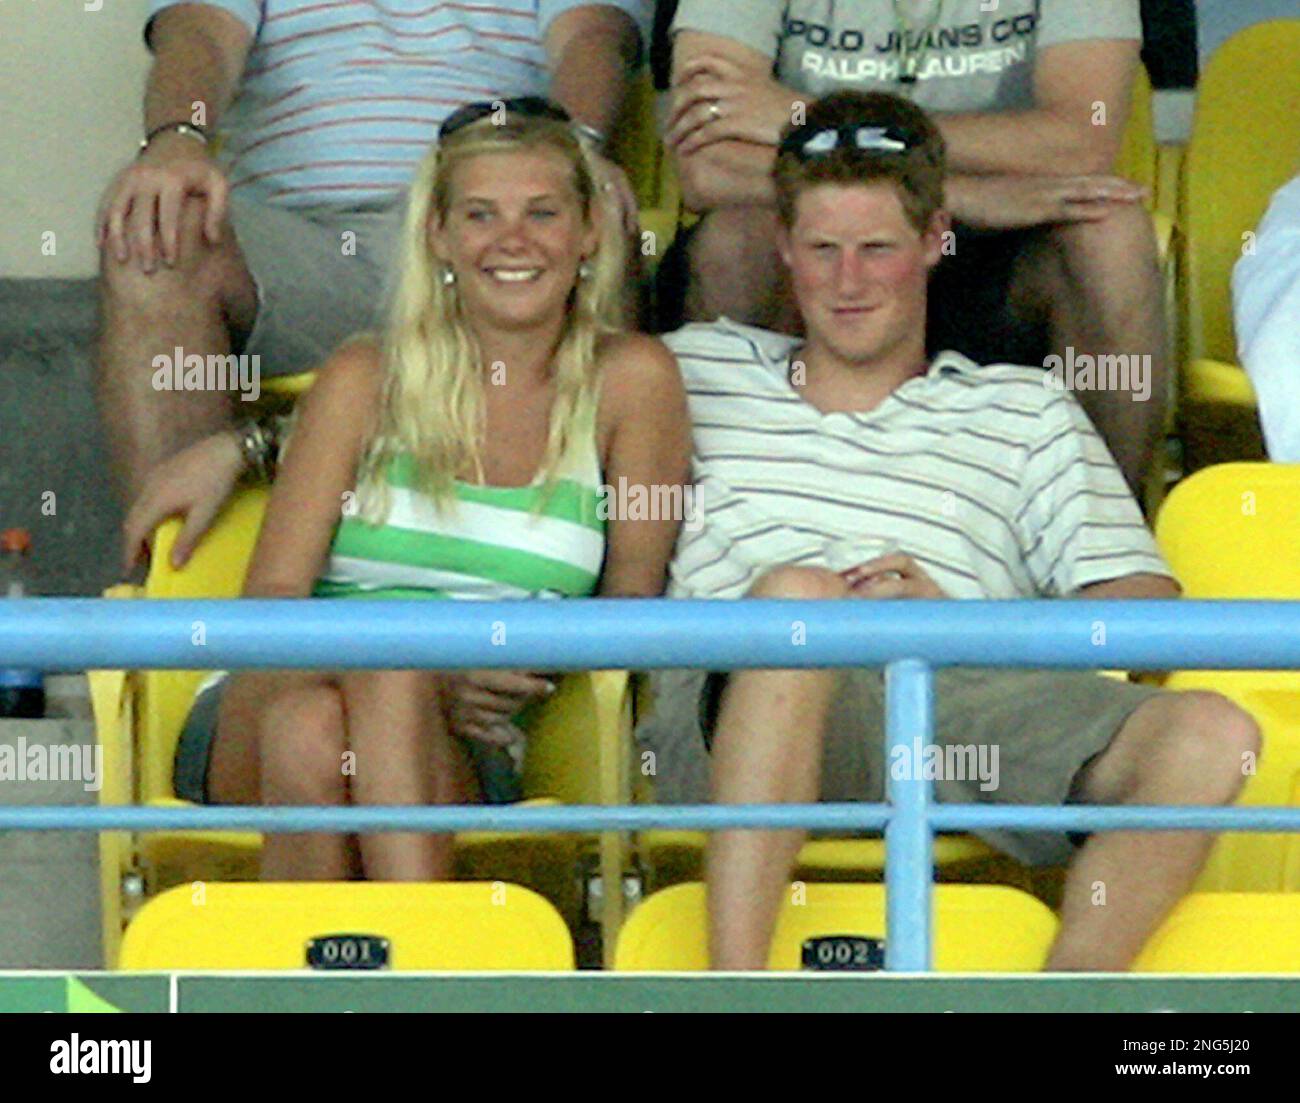 Britain's Prince Harry, right, sits with his girlfriend Chelsy Davy as they attend the Cricket World Cup Super 8s match between England and Australia at the Sir Vivian Richards Stadium in St Peter's, Antigua, Sunday April 8, 2007. (AP Photo/Matt Dunham) Stockfoto